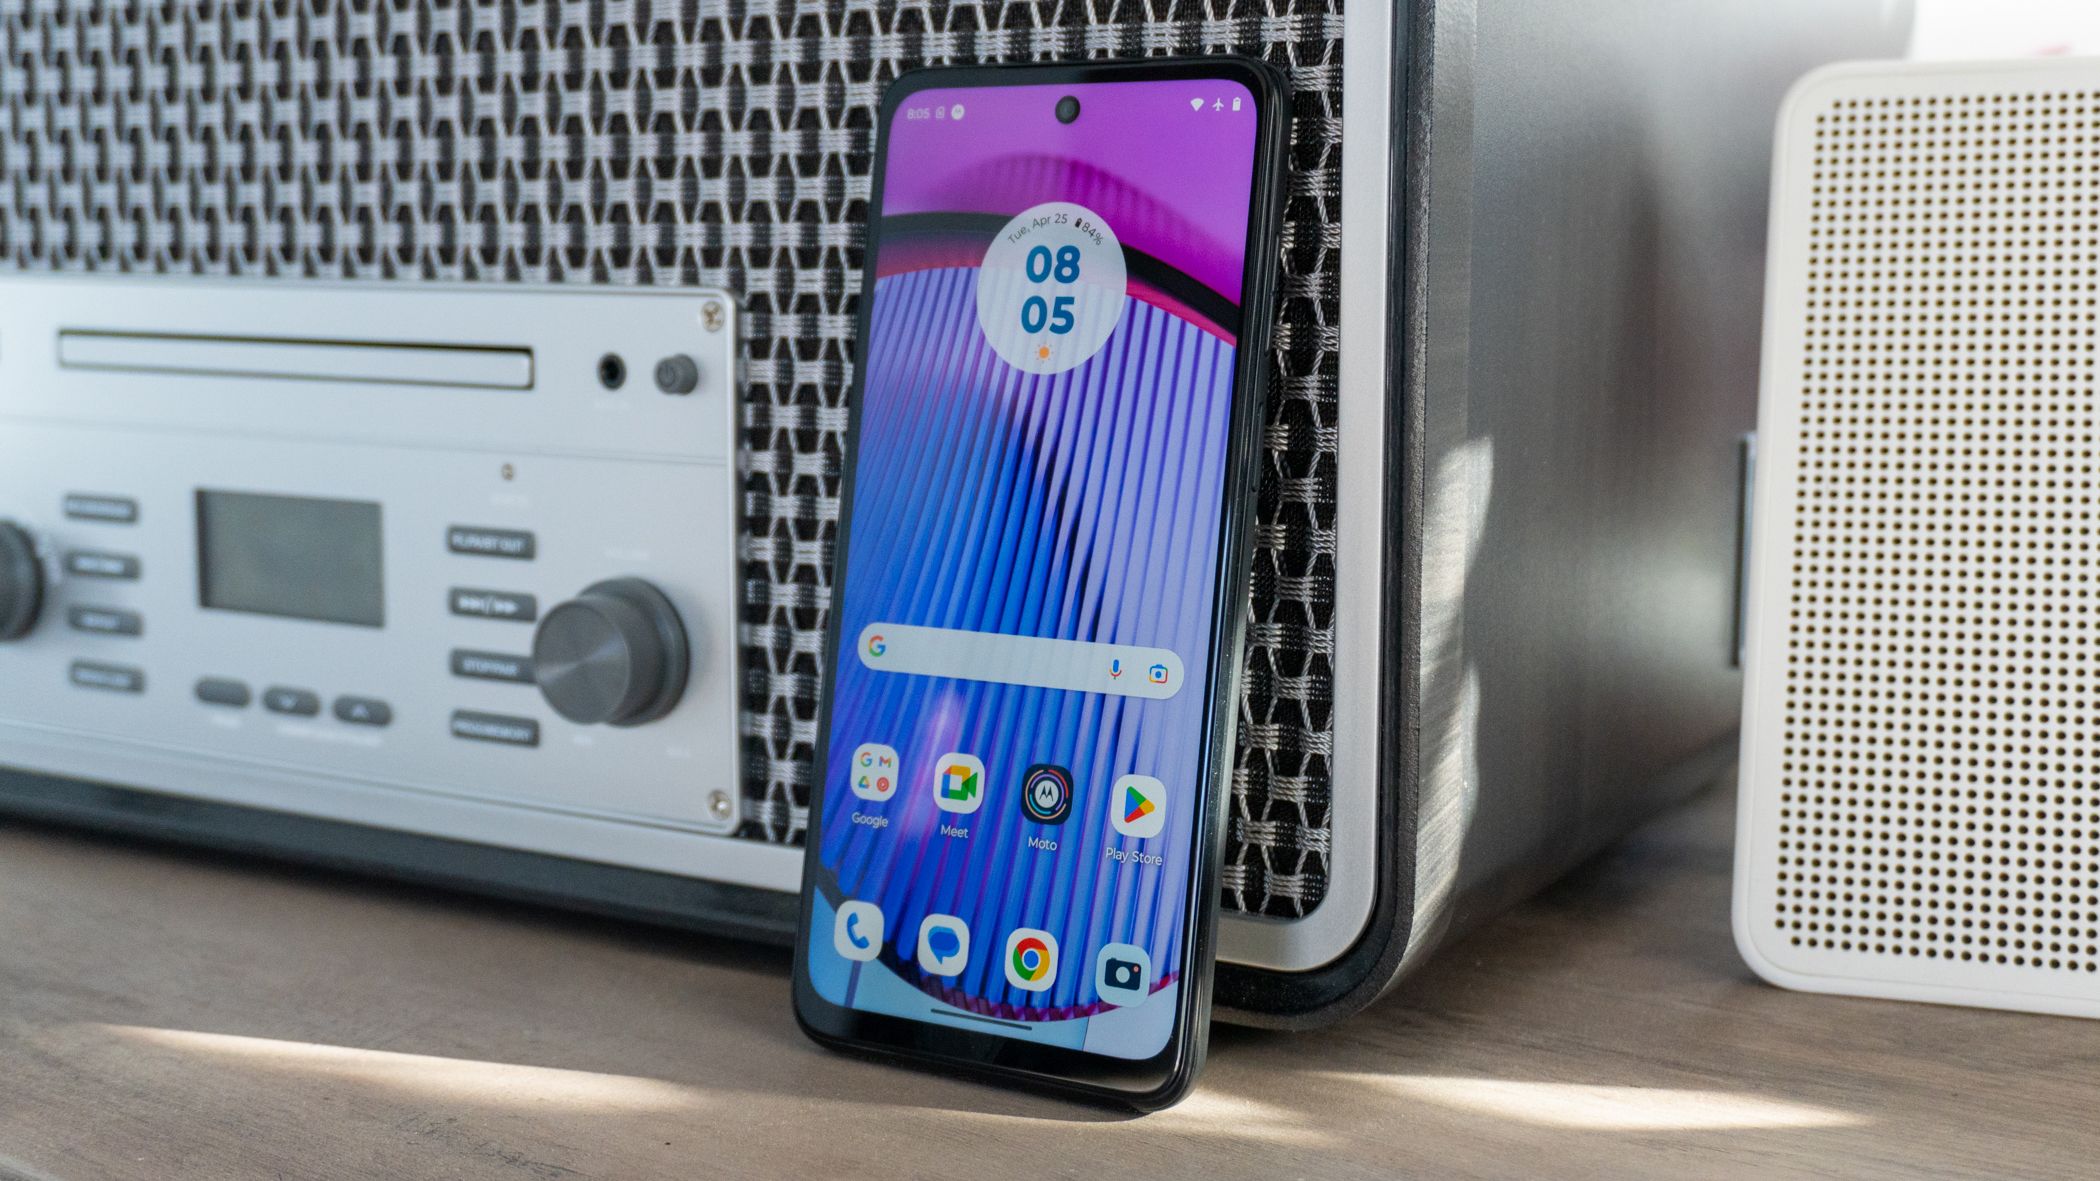 Samsung Galaxy S10 5G review: Is 5G worth the added cost?